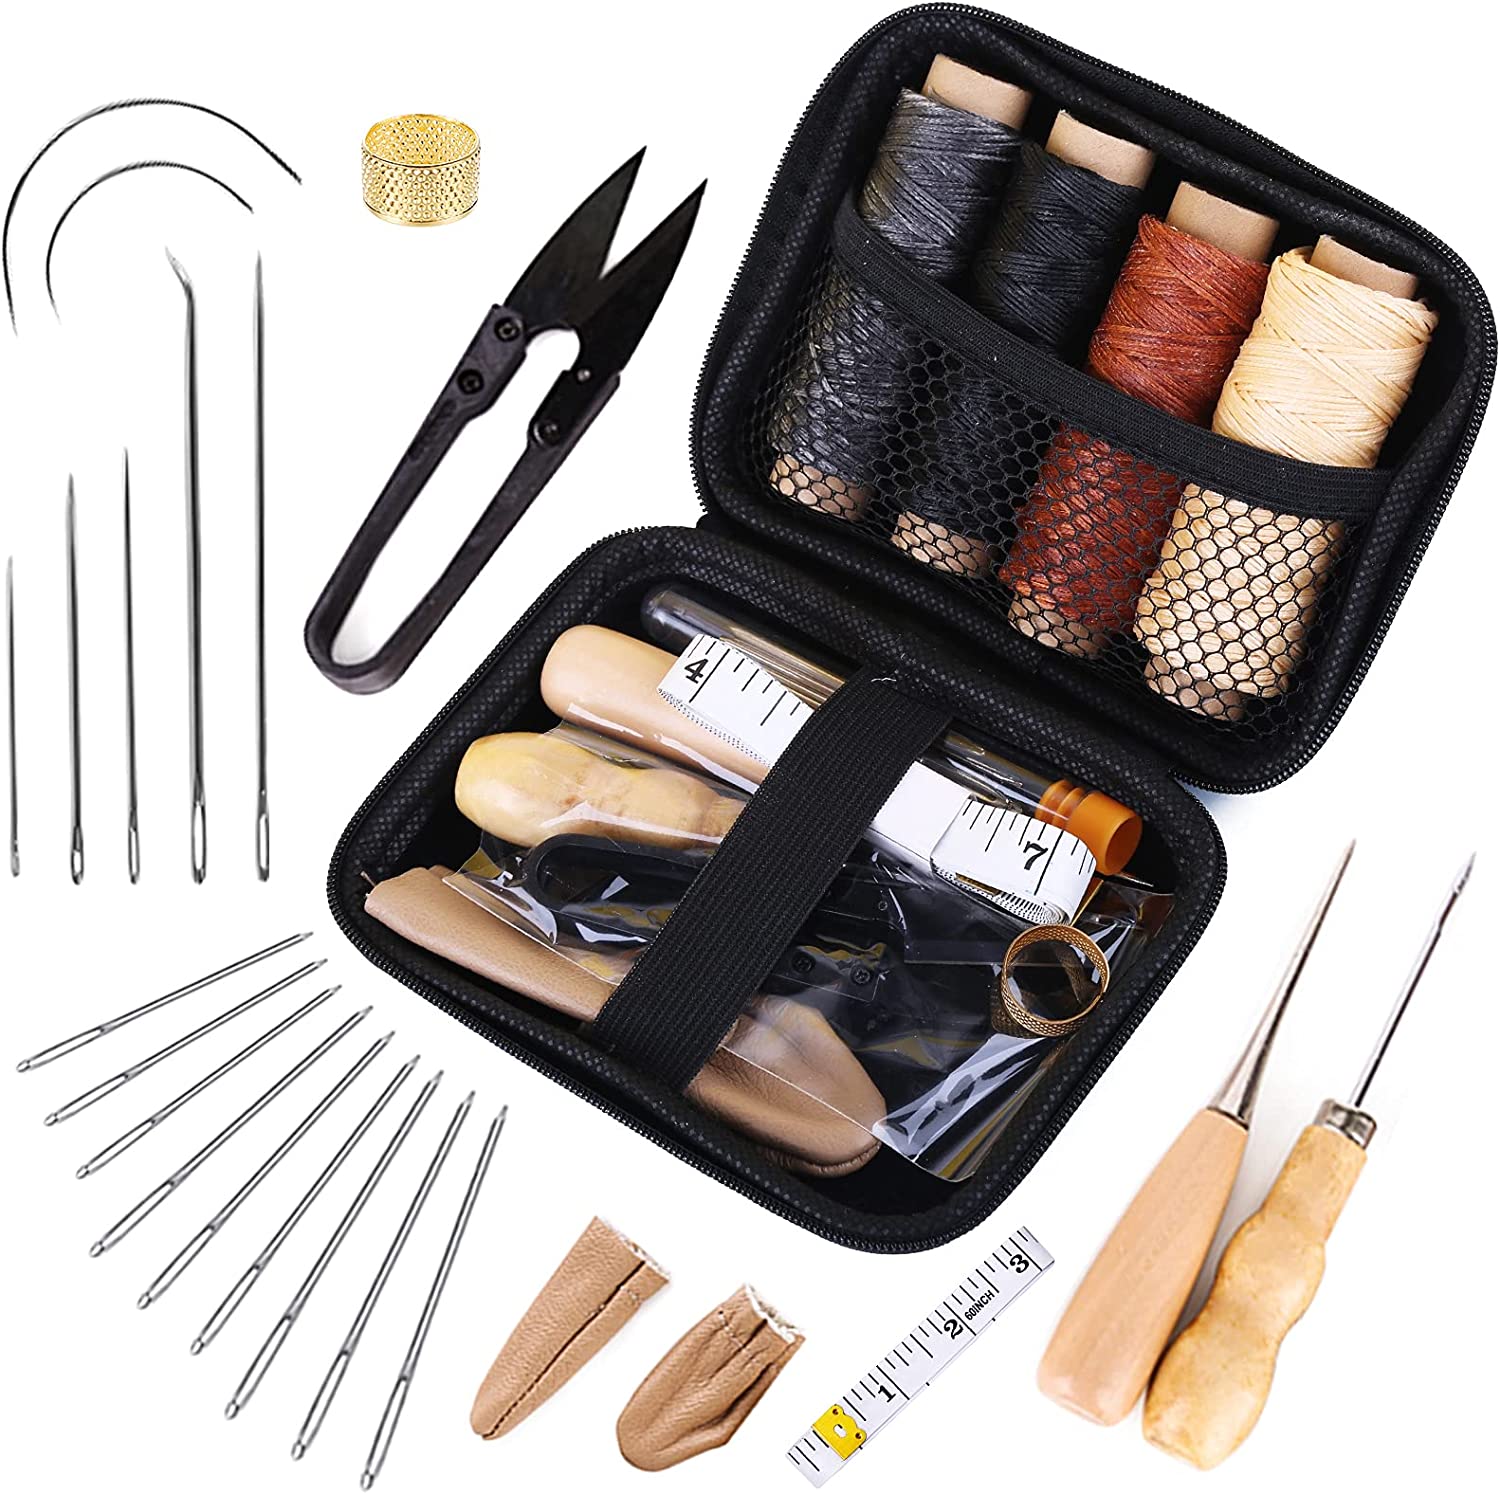 Leathercraft Hand Tools Kit, Leather Working Tools with Leather Prong  Punch, Leather Hammer, Stitching Groover, Leather Skiver, and Other DIY  Leather